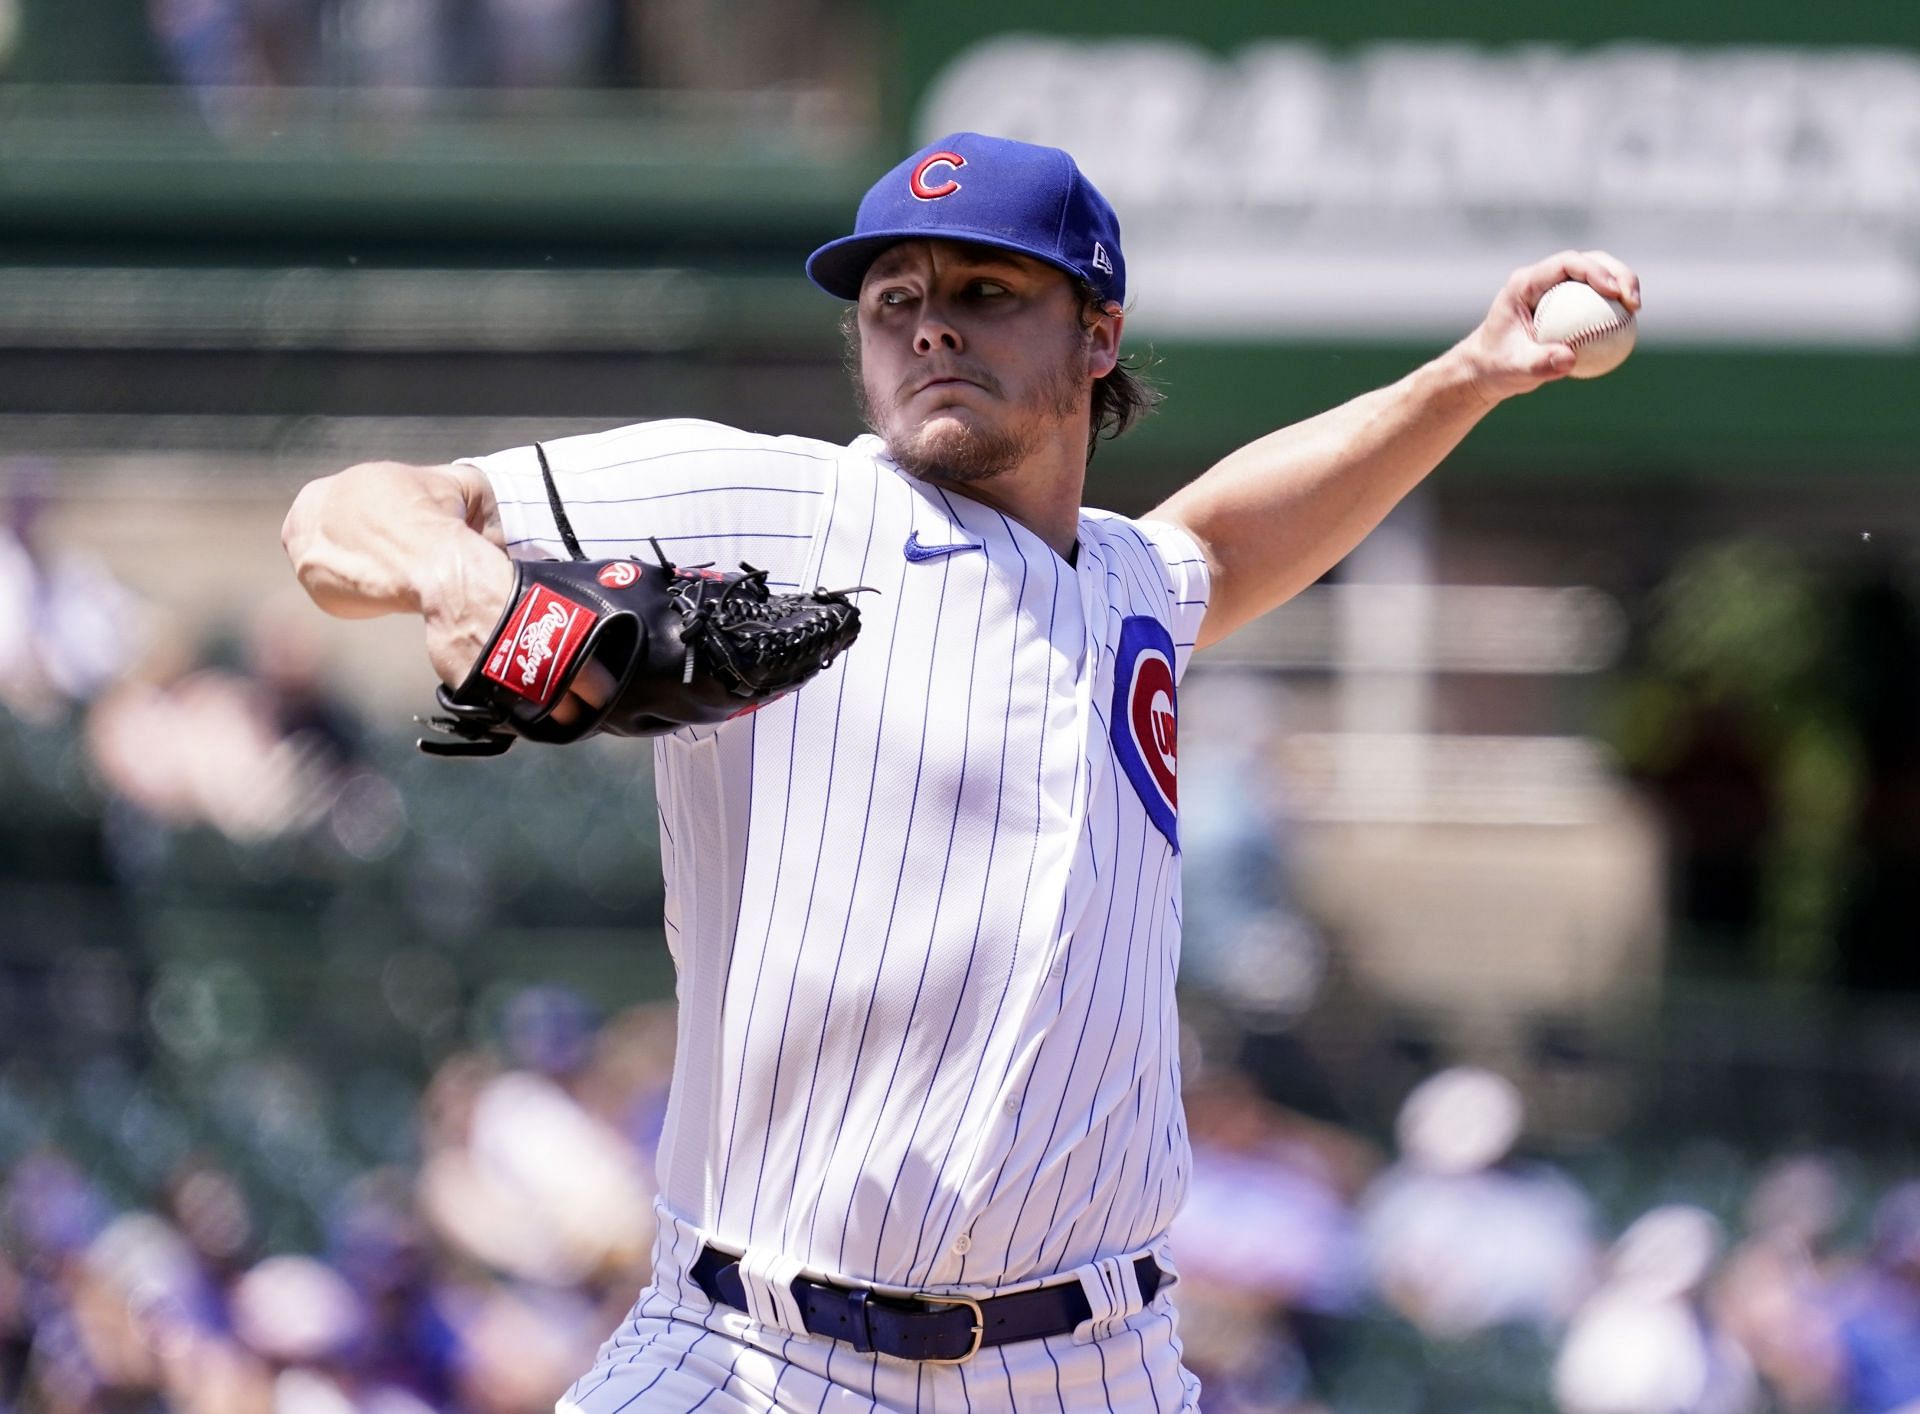 Justin Steele of the Chicago Cubs pitches during the third inning of a game against the Tampa Bay Rays.